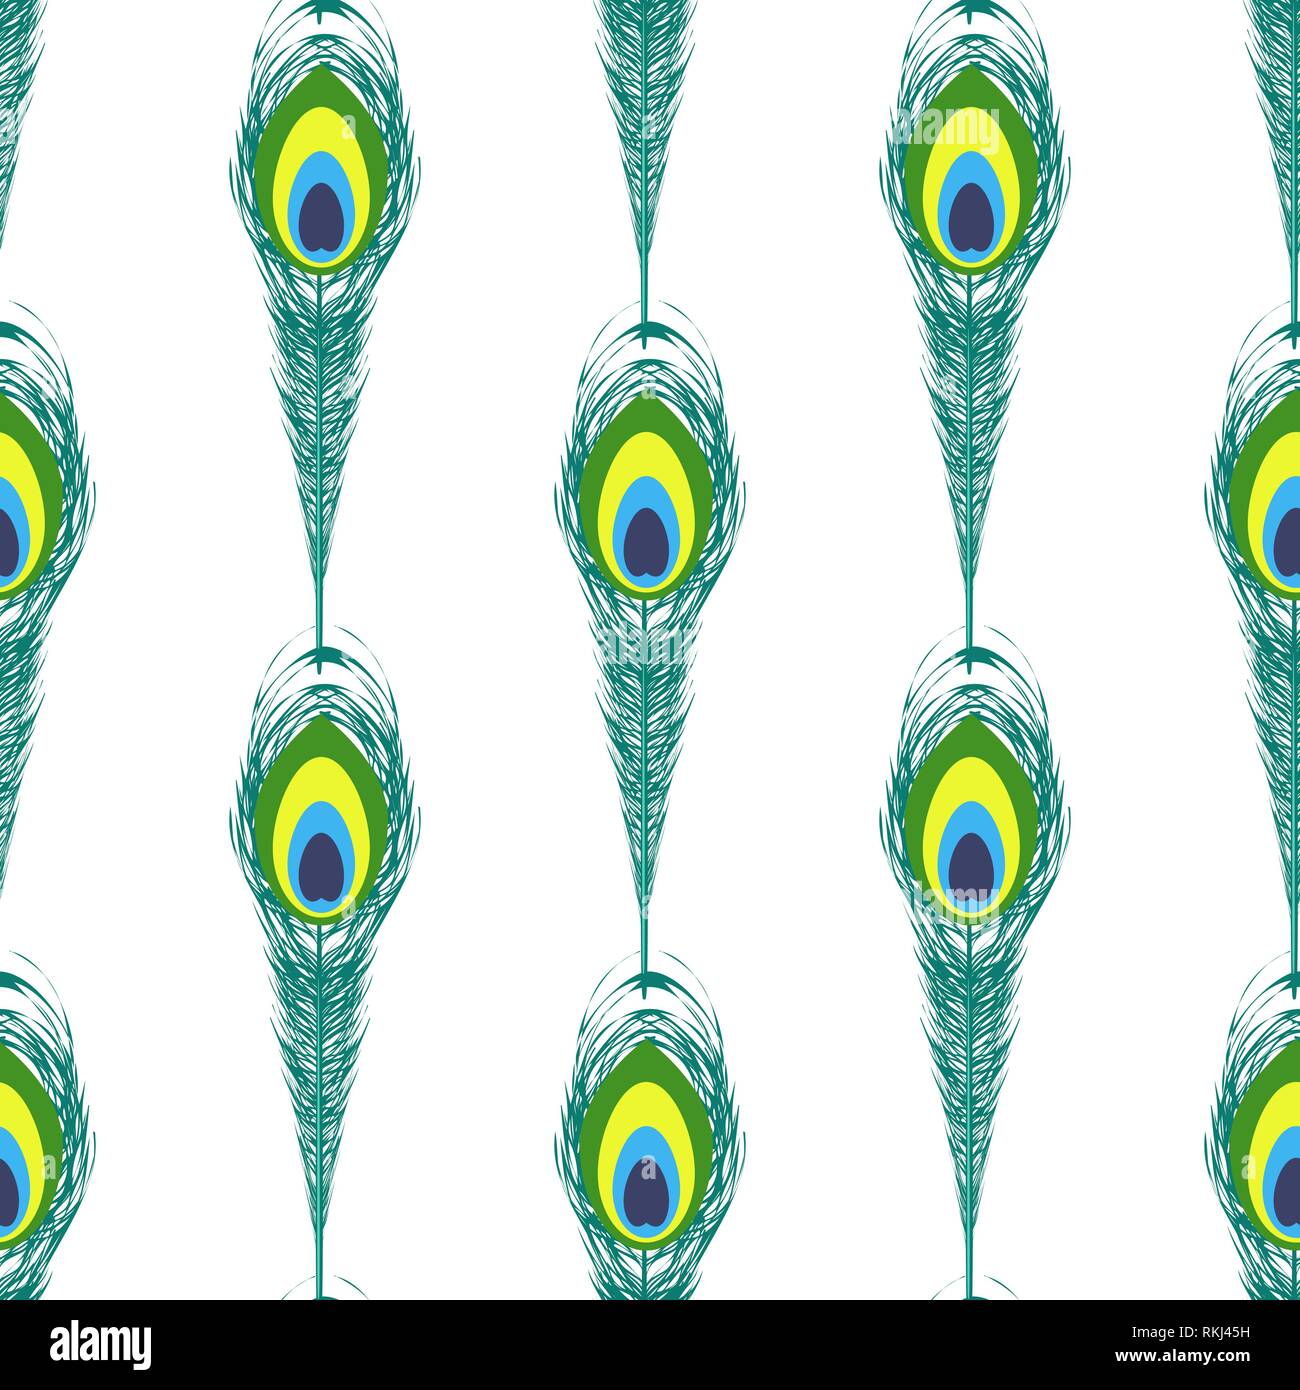 Colorful Peacock Feathers Seamless Pattern Stock Vector